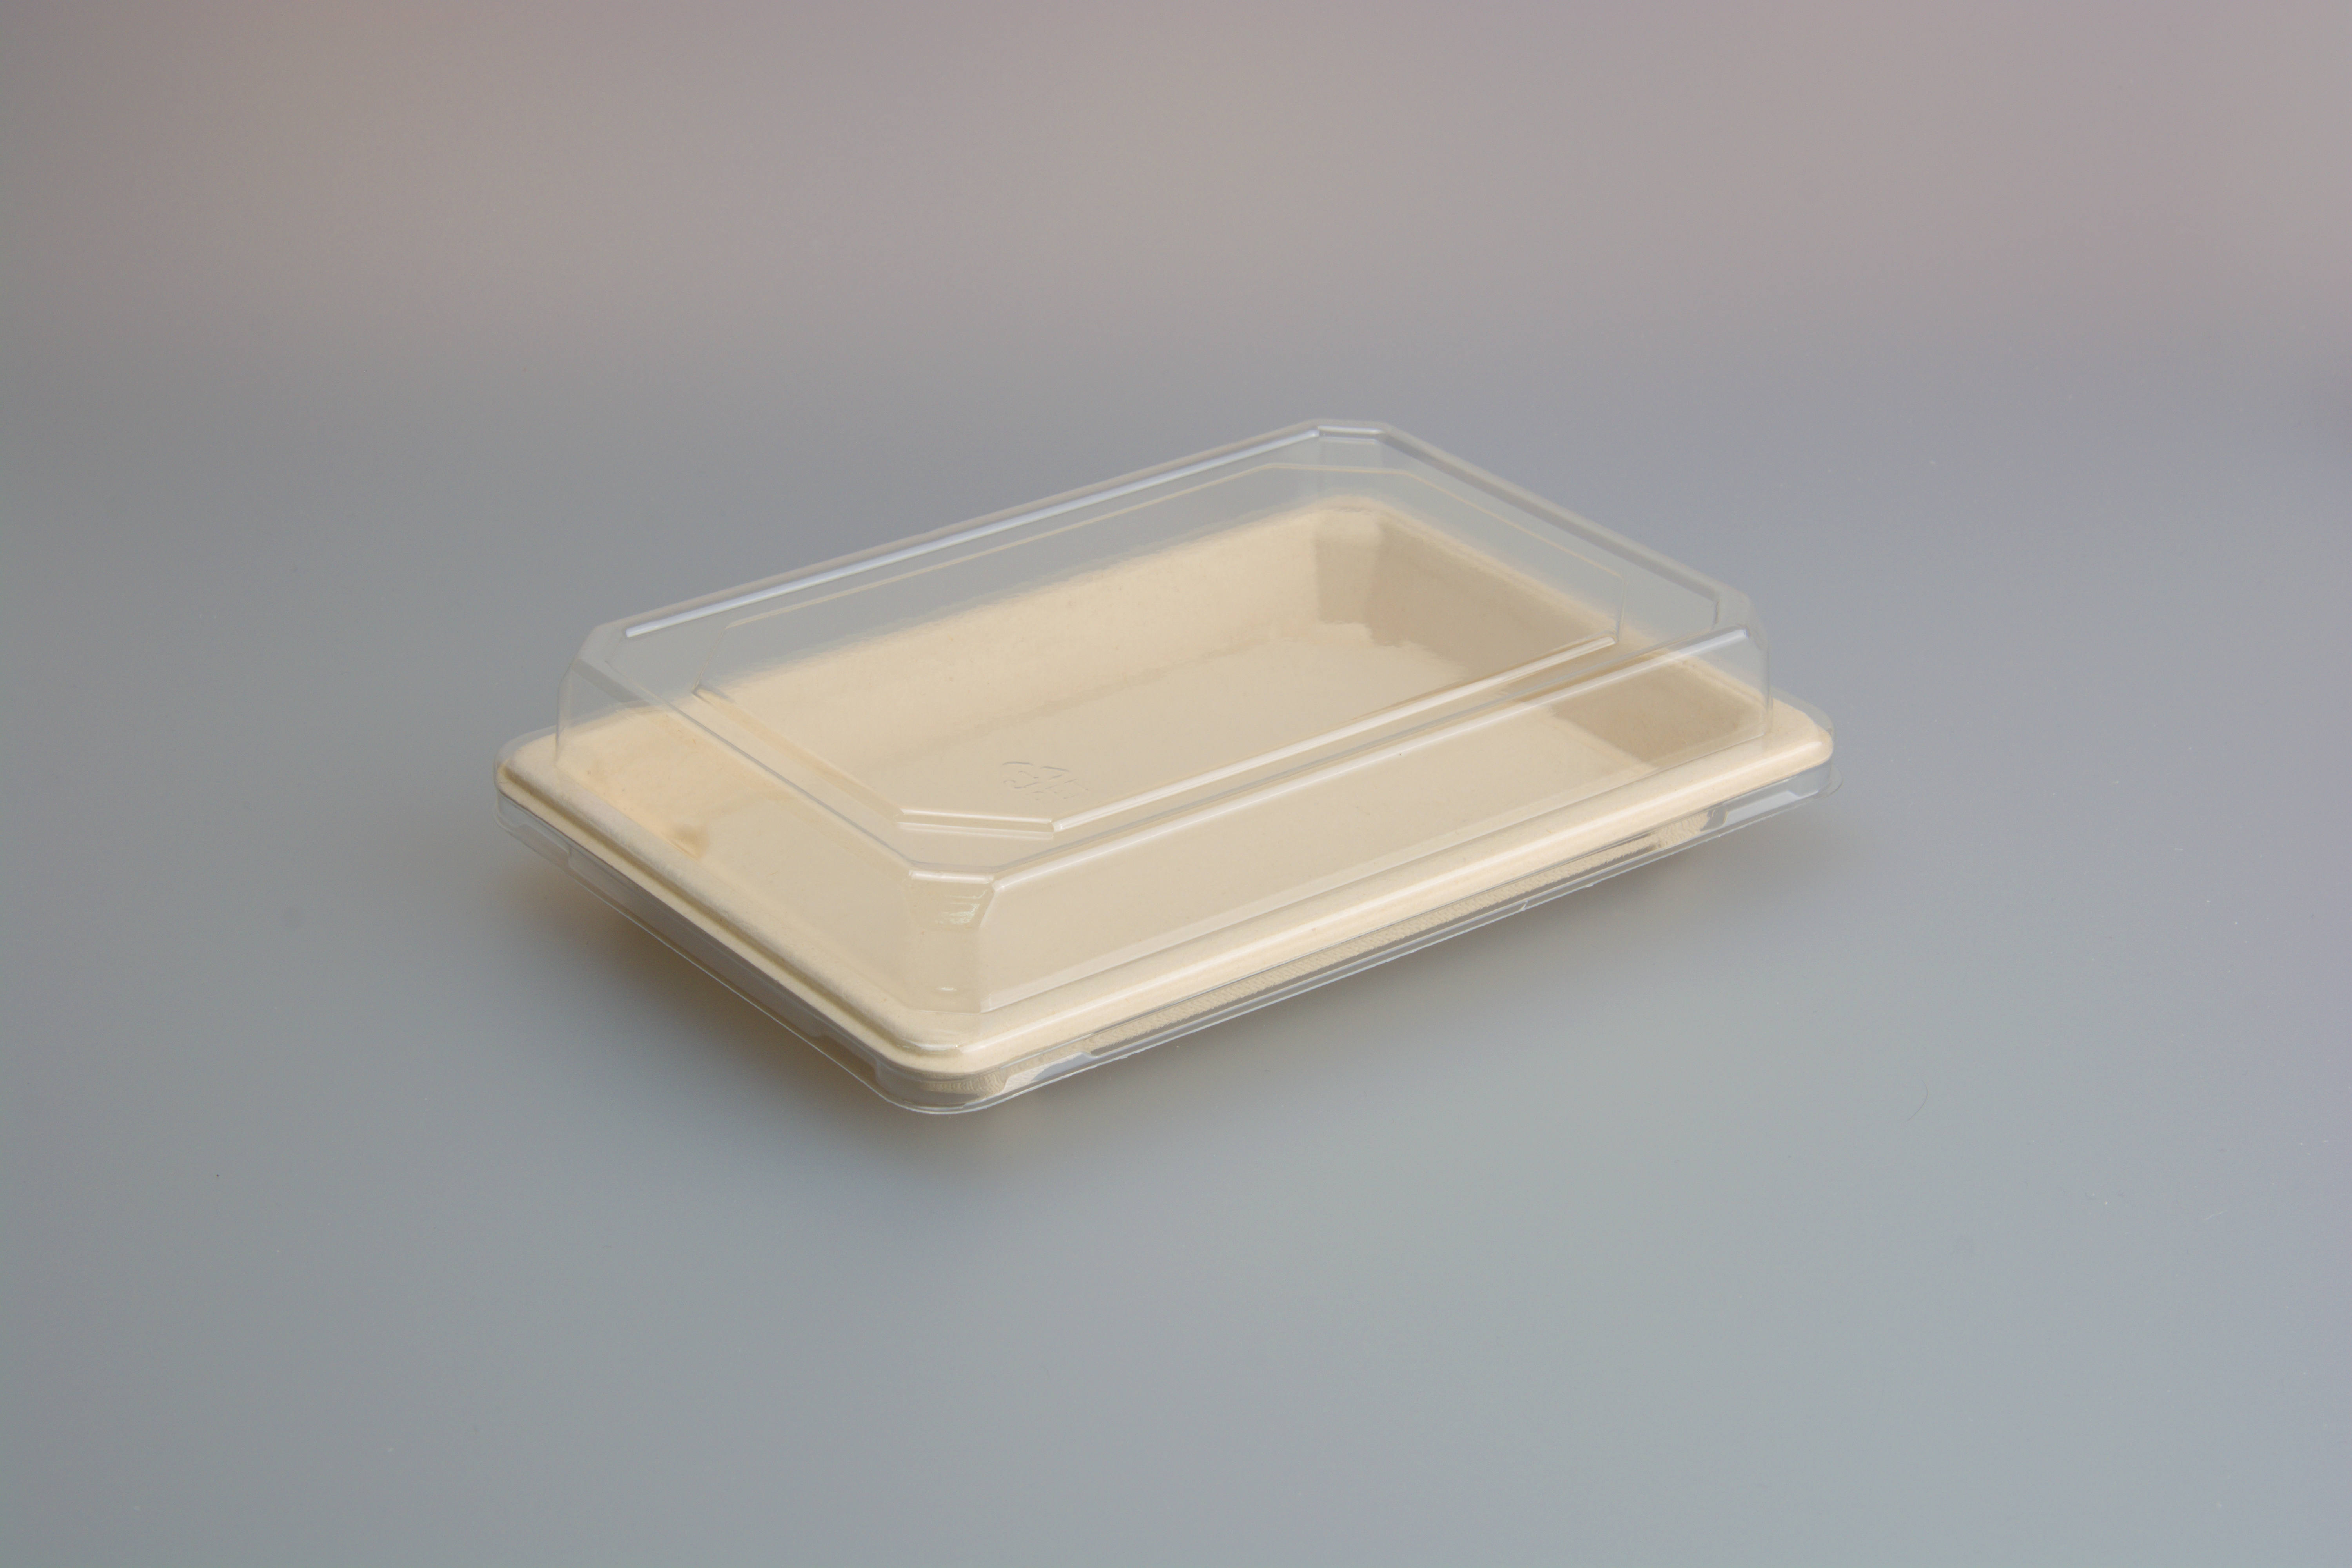 Hot sale Factory Sugarcane Bagasse Spoon - 7.3*5.0 INCH Sushi Trays, Disposable Sushi Containers With Lids – Short, Take Out Containers For Appetizers, Entrees, or Desserts, Black Plastic To...